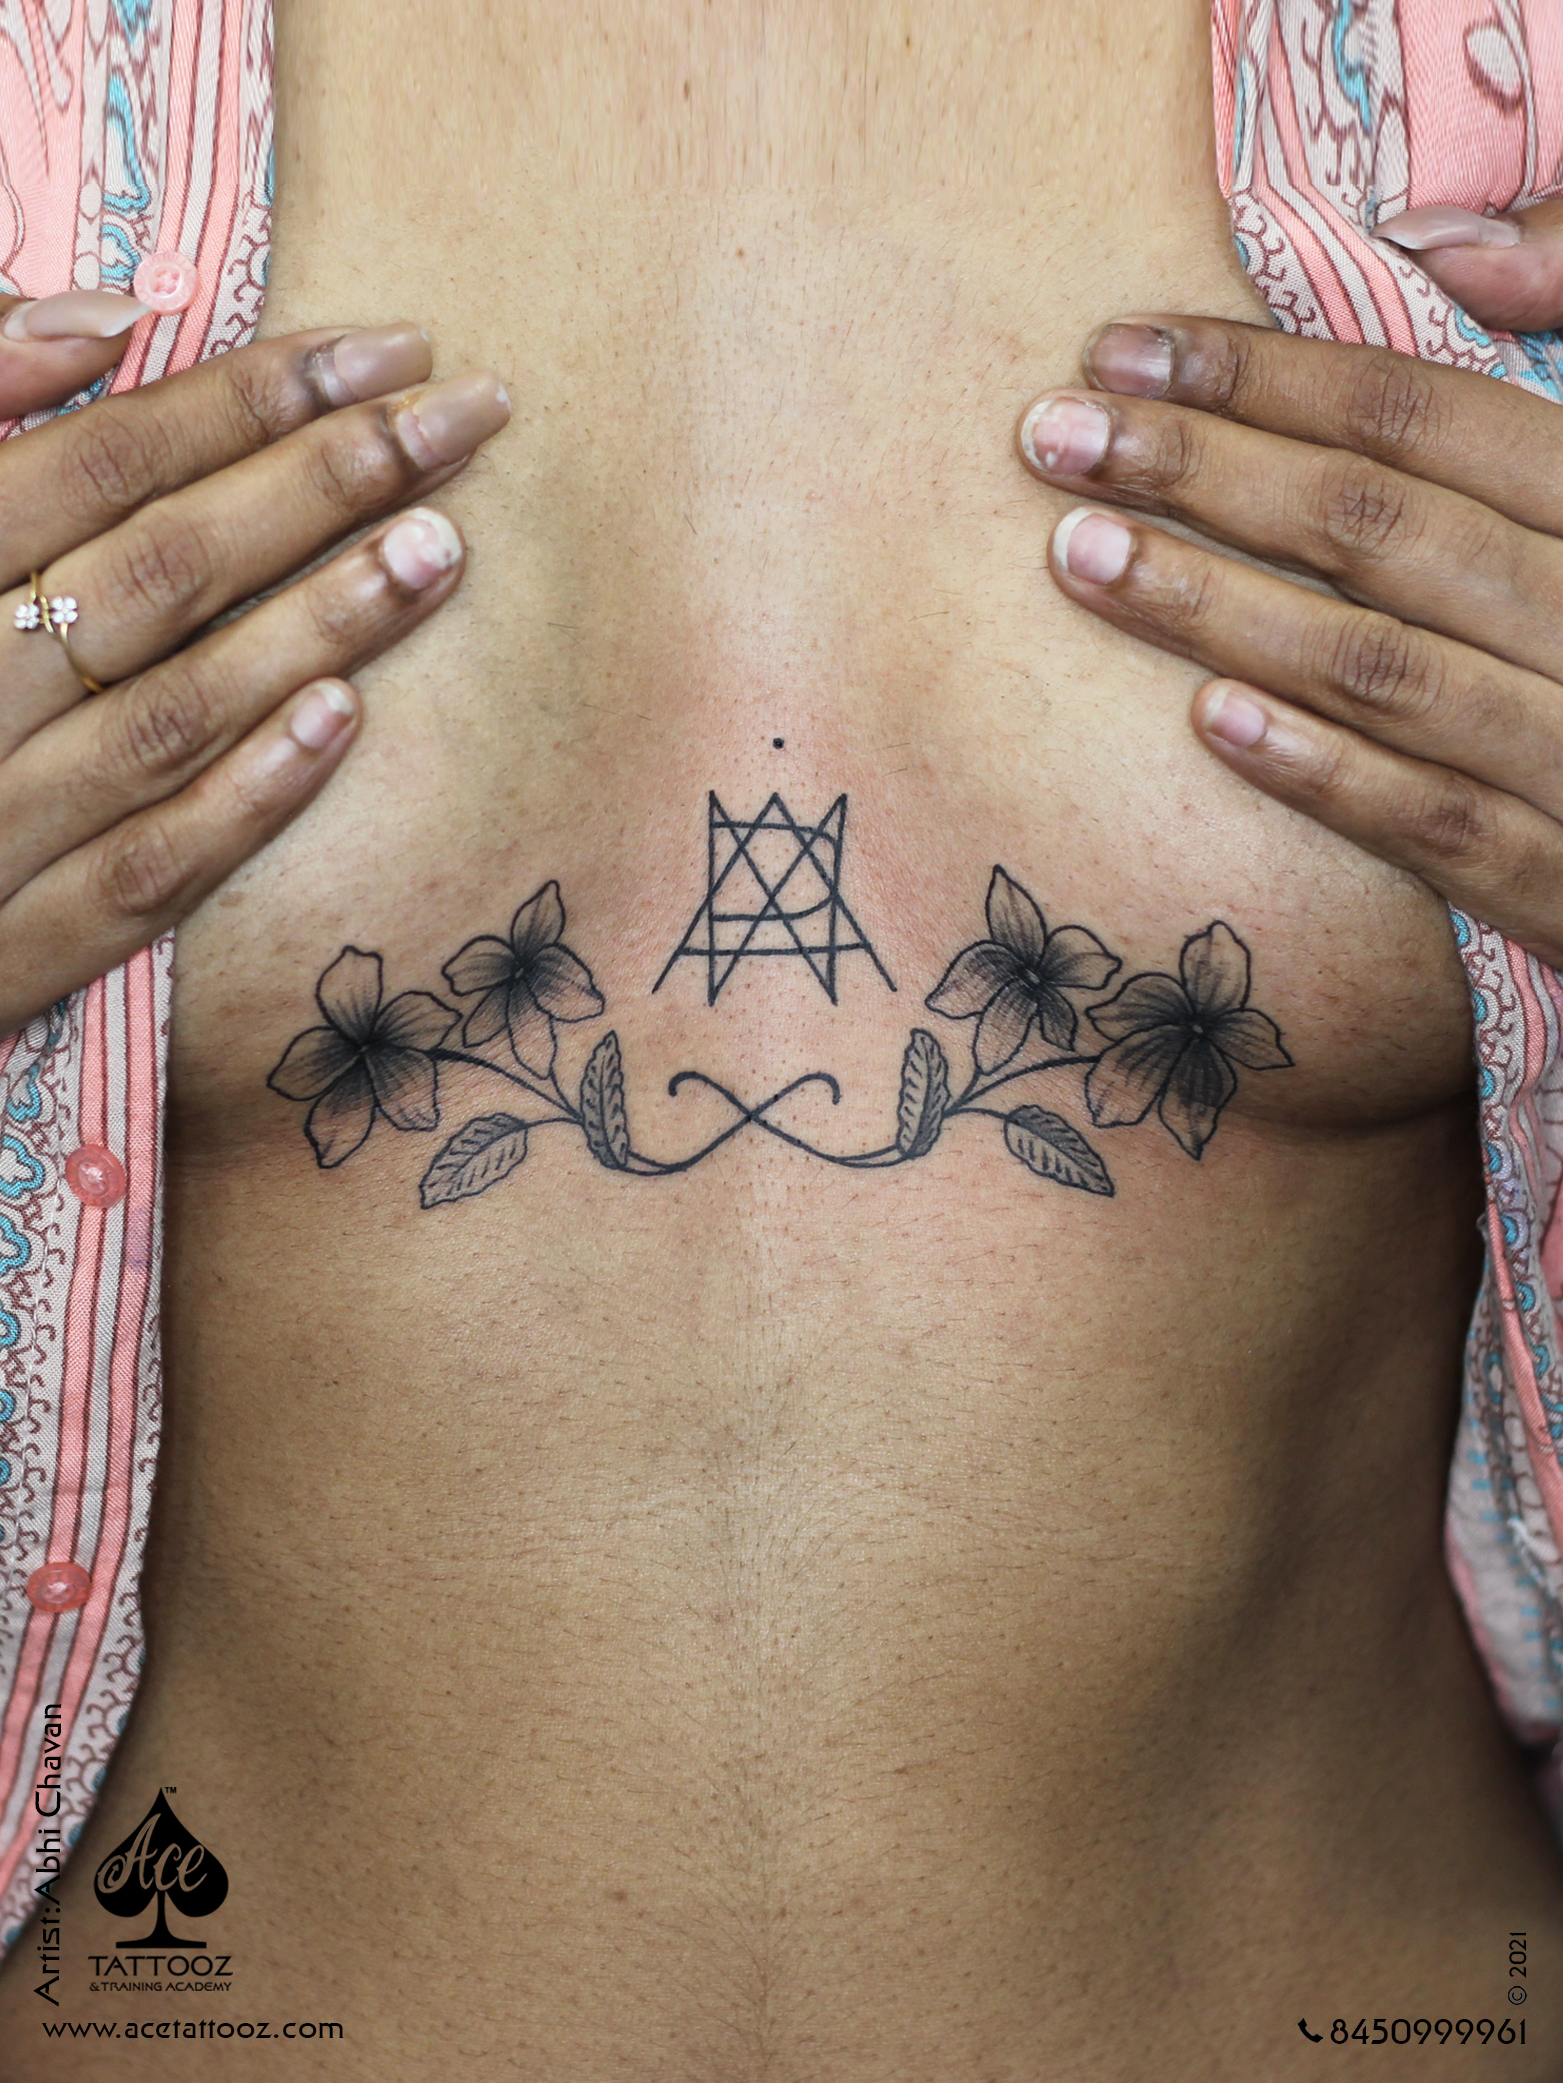 Chest Tattoos Impressive Designs That Will Make You Want To Get One